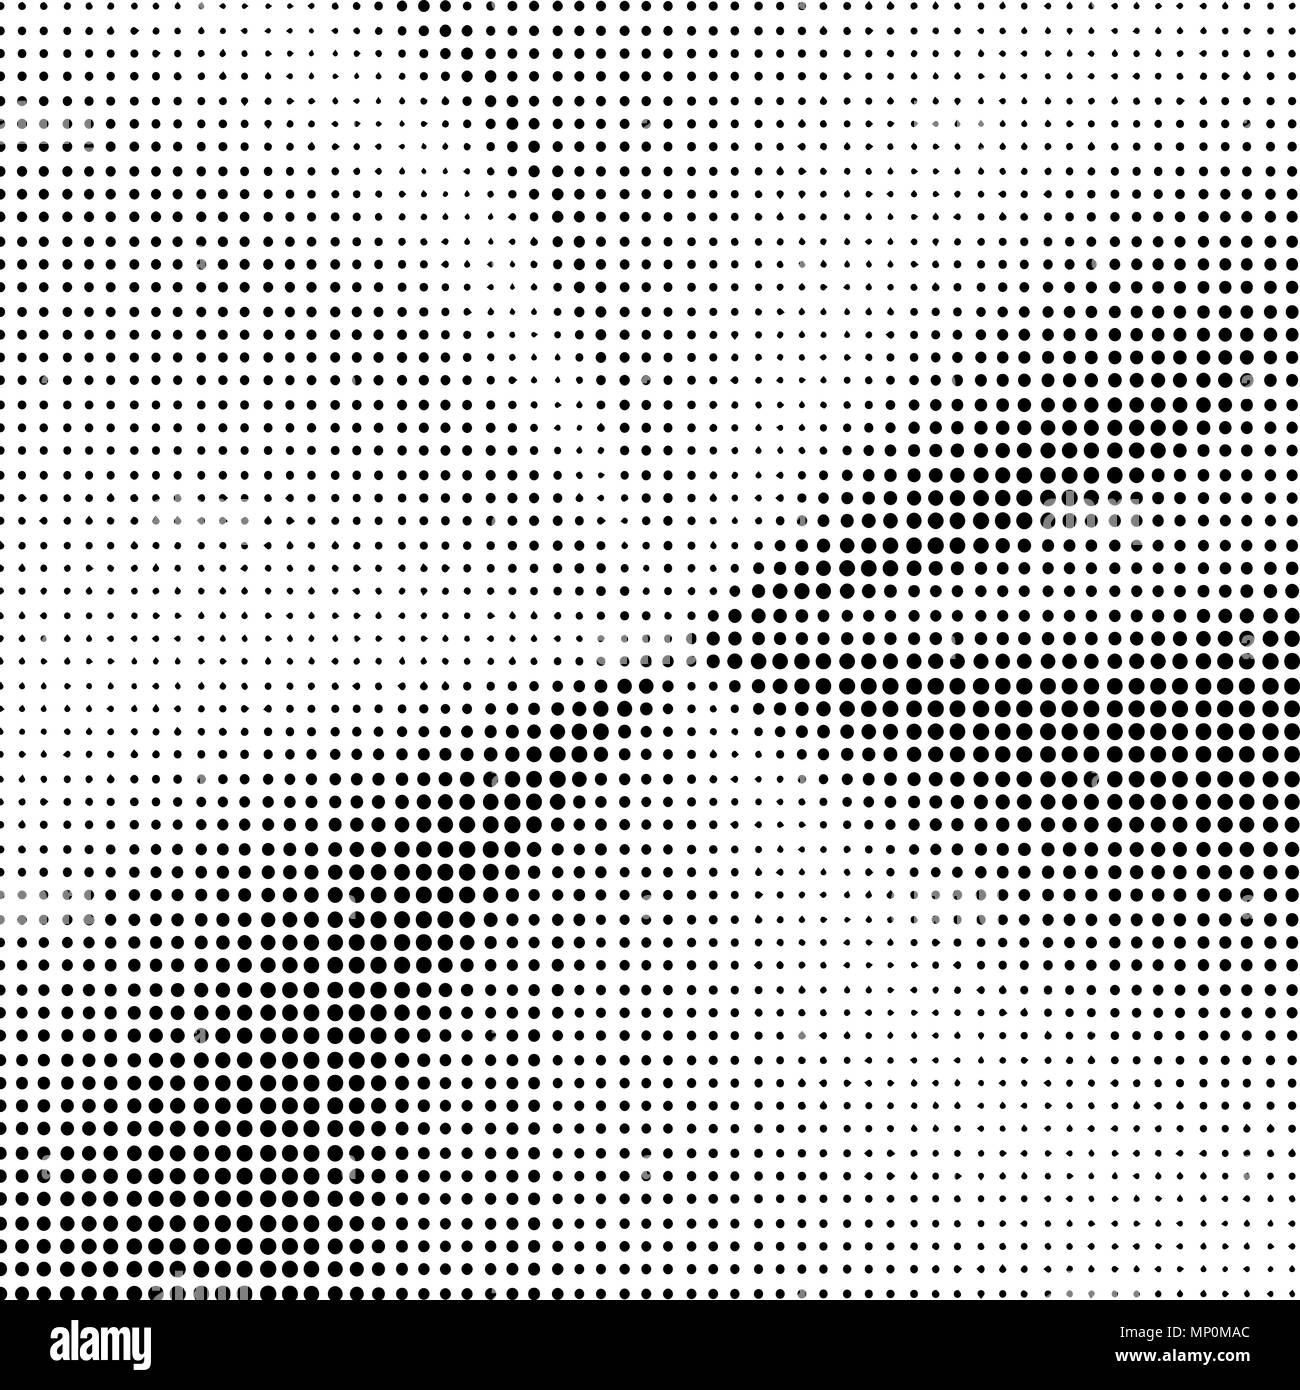 Halftone Background. Dotted Abstract Texture Stock Vector